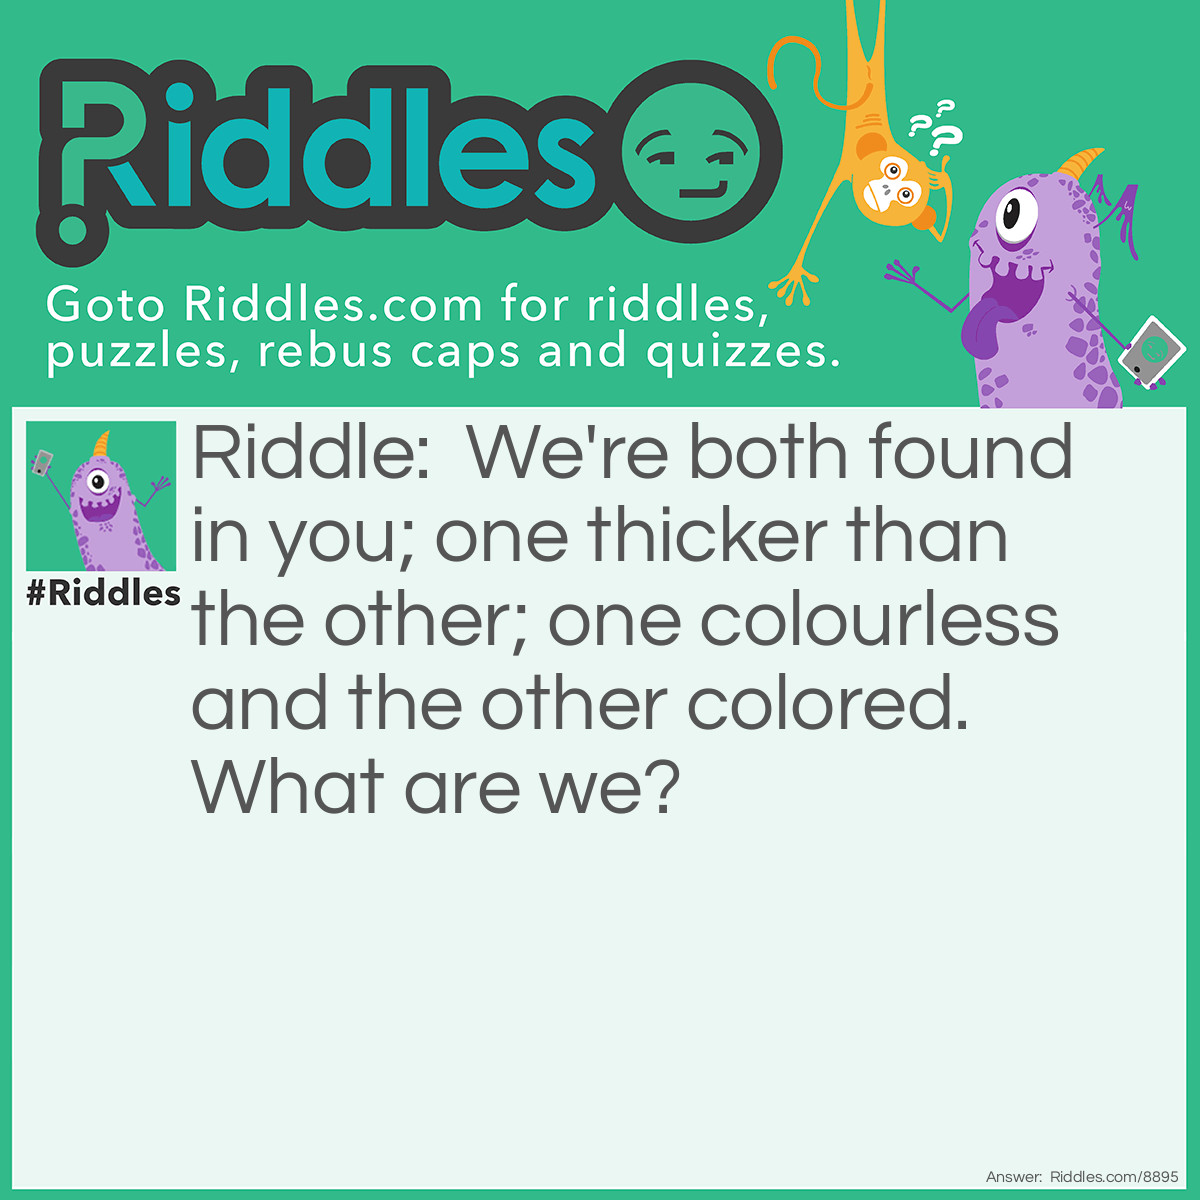 Riddle: We're both found in you; one thicker than the other; one colourless and the other colored. What are we? Answer: Water and blood.